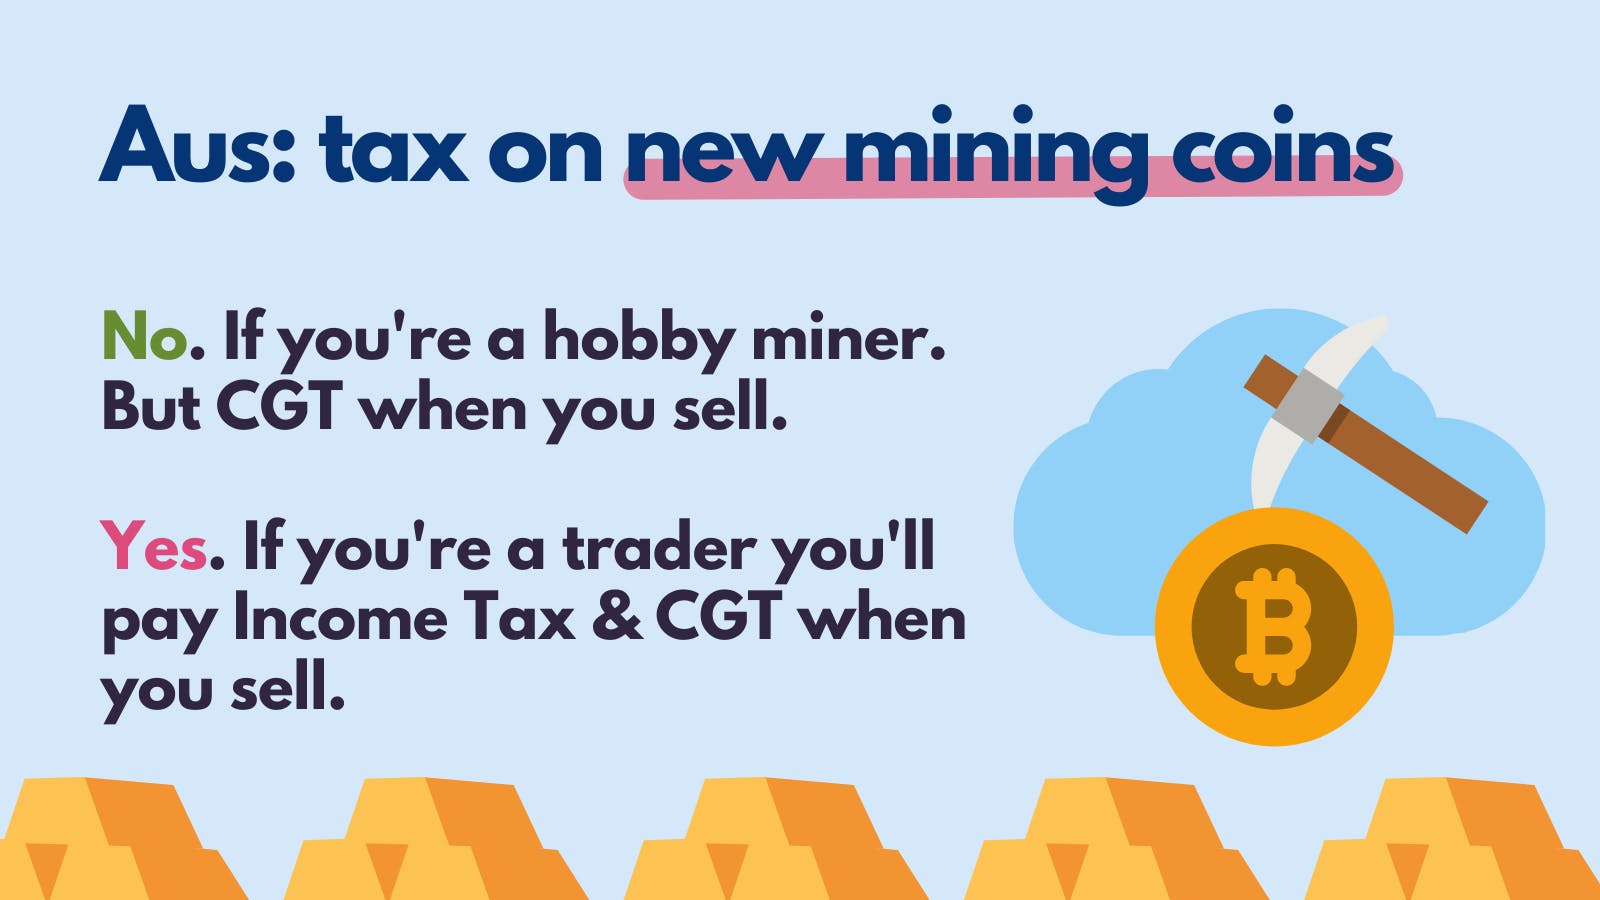 how to report crypto mining on taxes